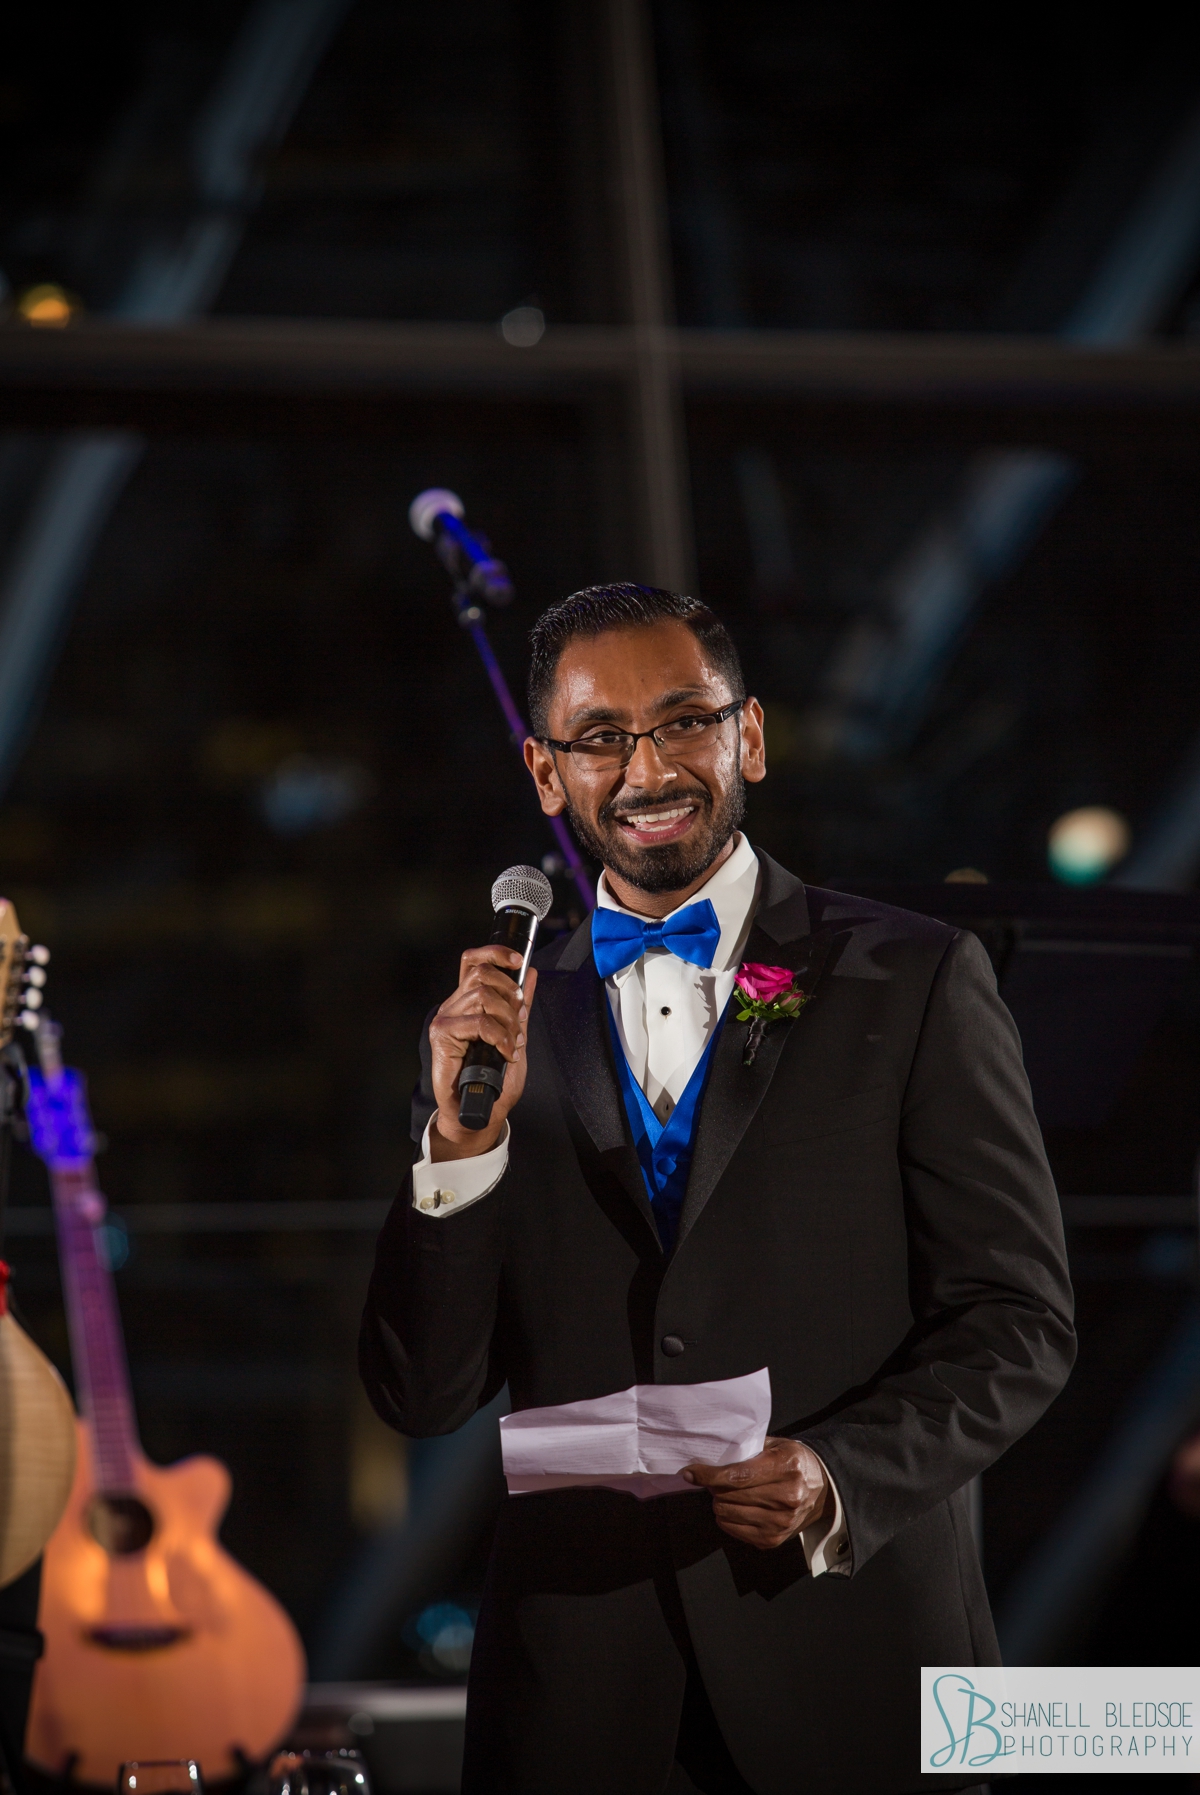 brother toasts bride and groom at country music hall of fame Indian wedding reception